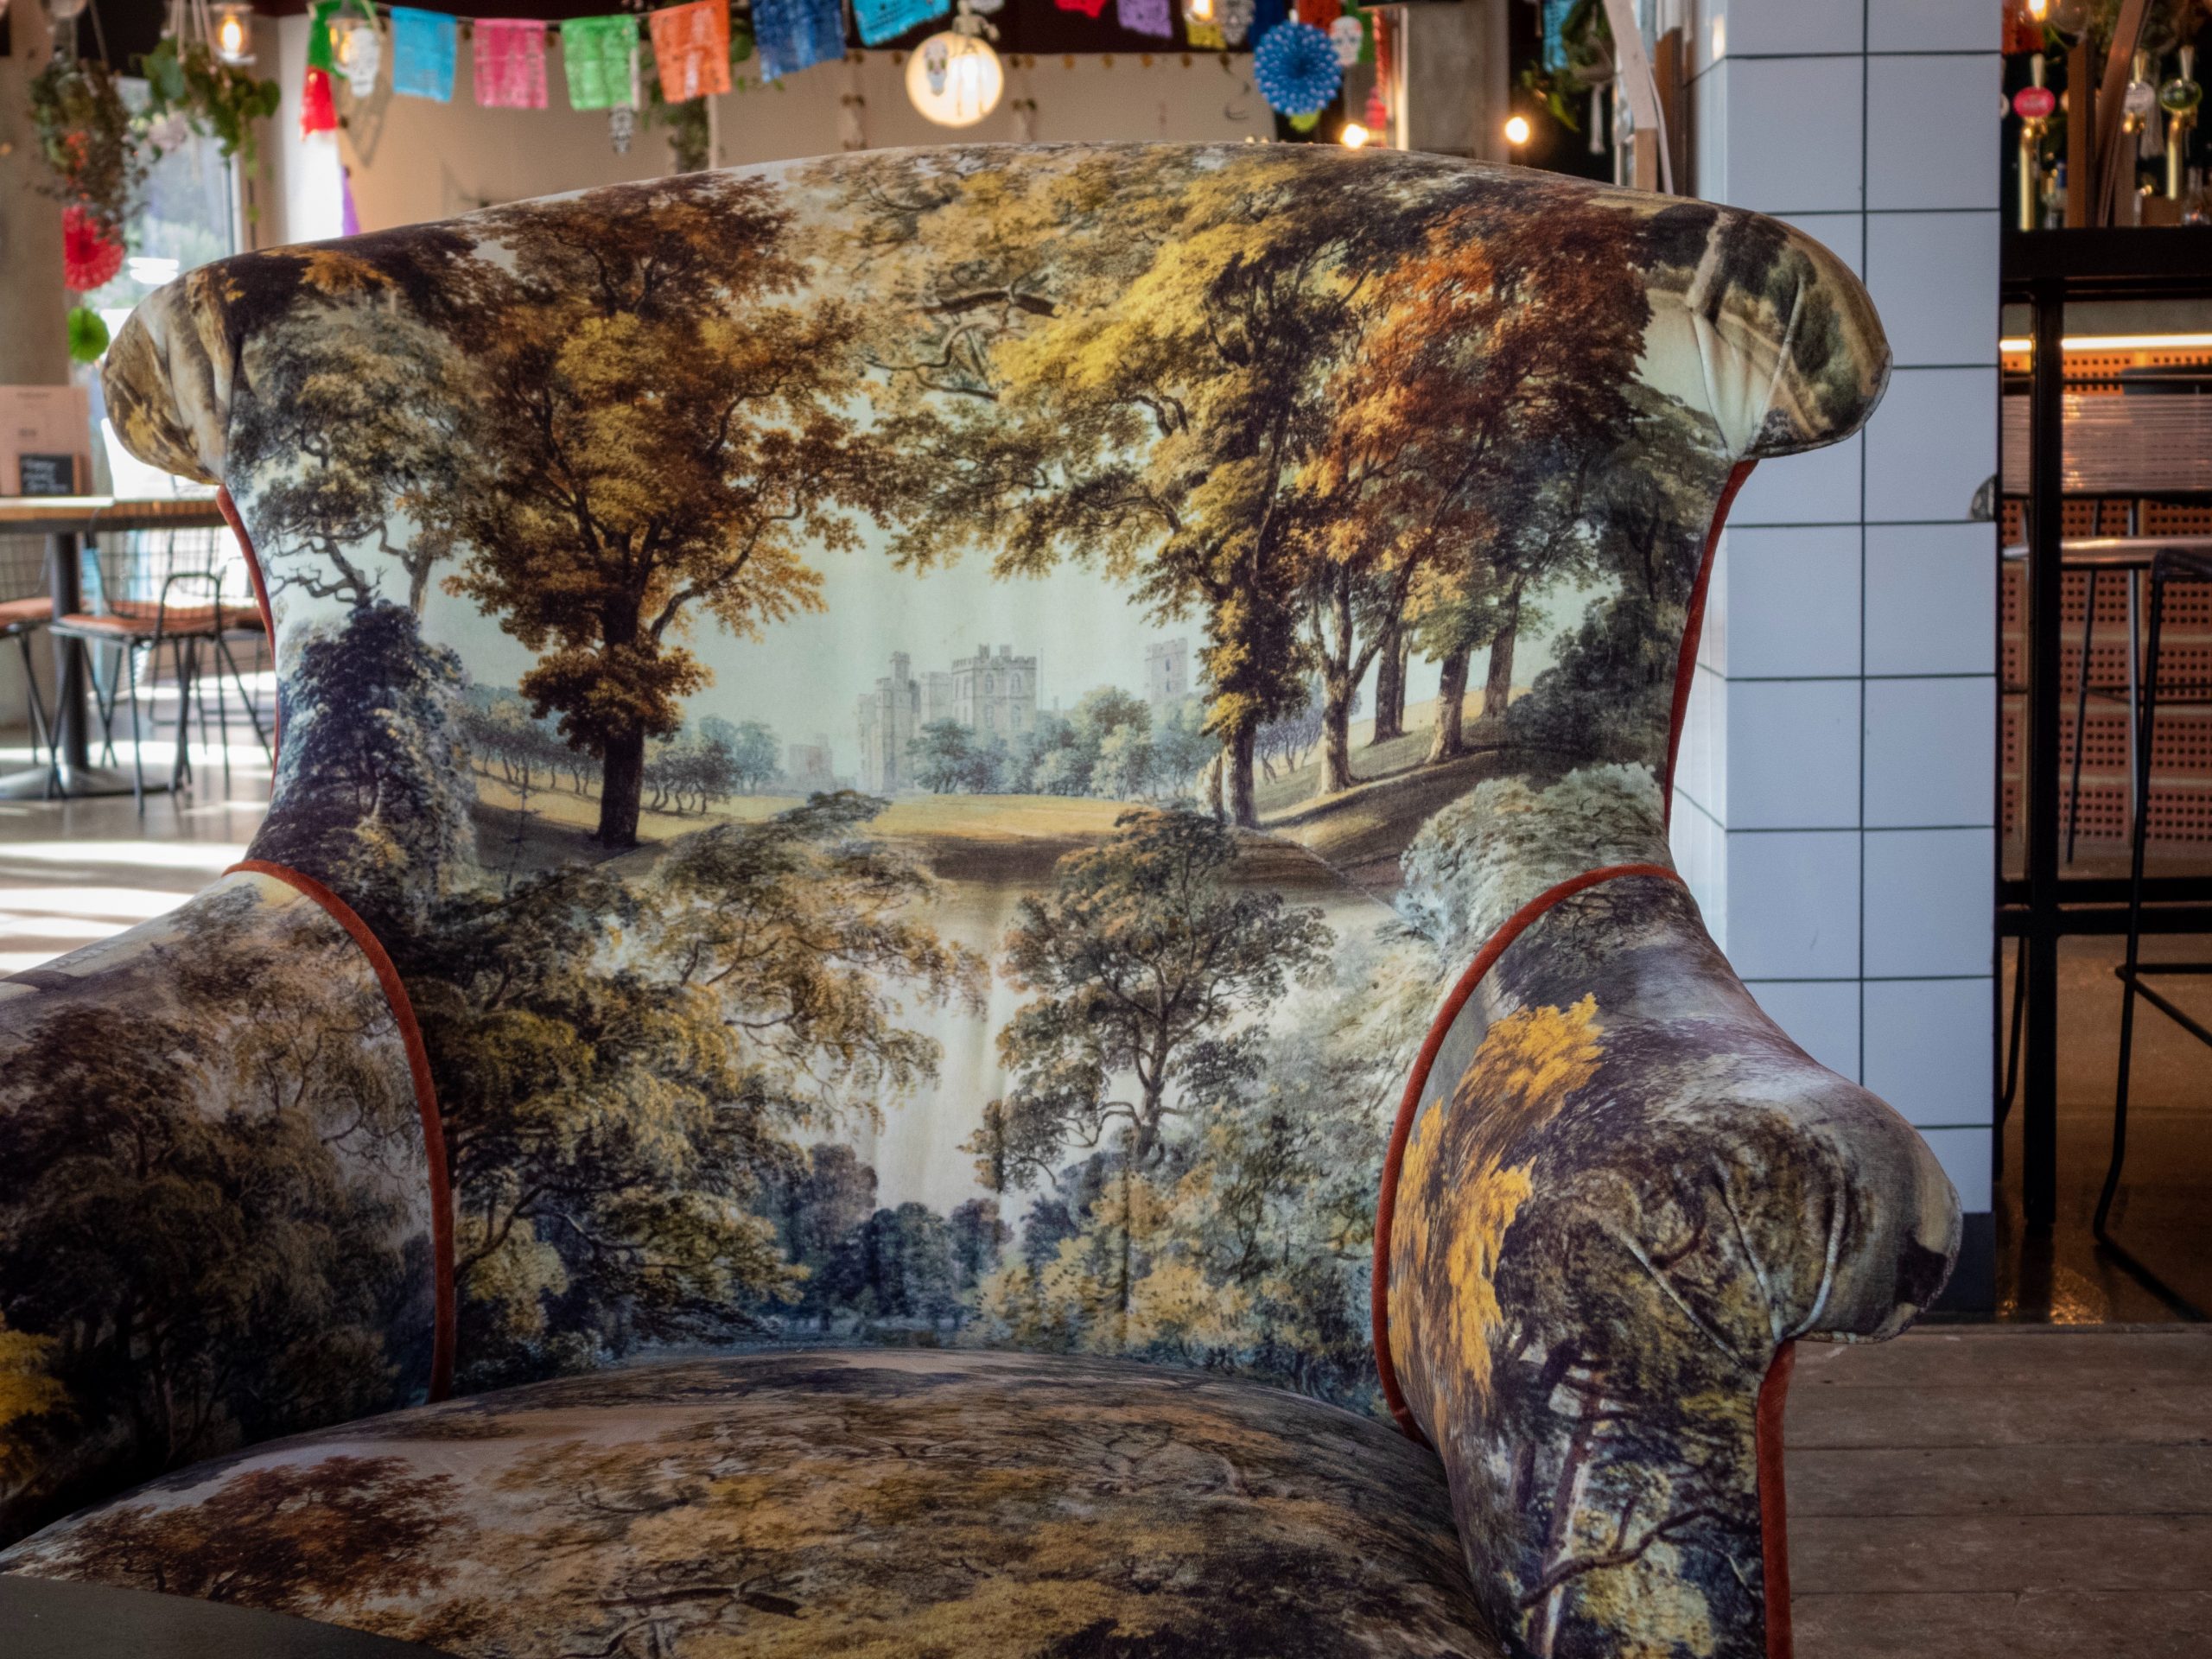 Toile de Jouy: what is it and a brief history - Homes and Antiques